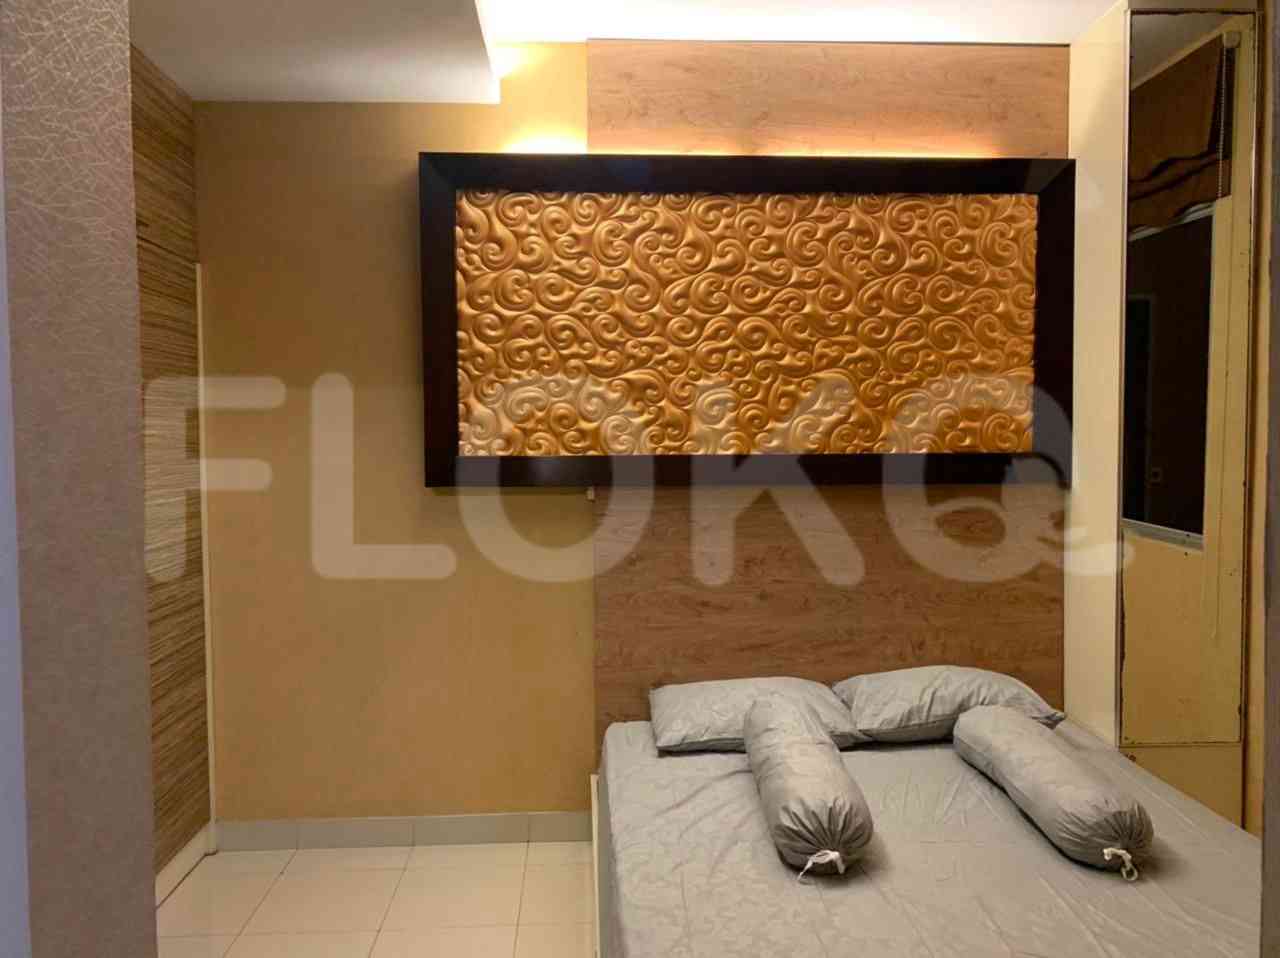 1 Bedroom on 6th Floor for Rent in Kuningan Place Apartment - fkued1 1